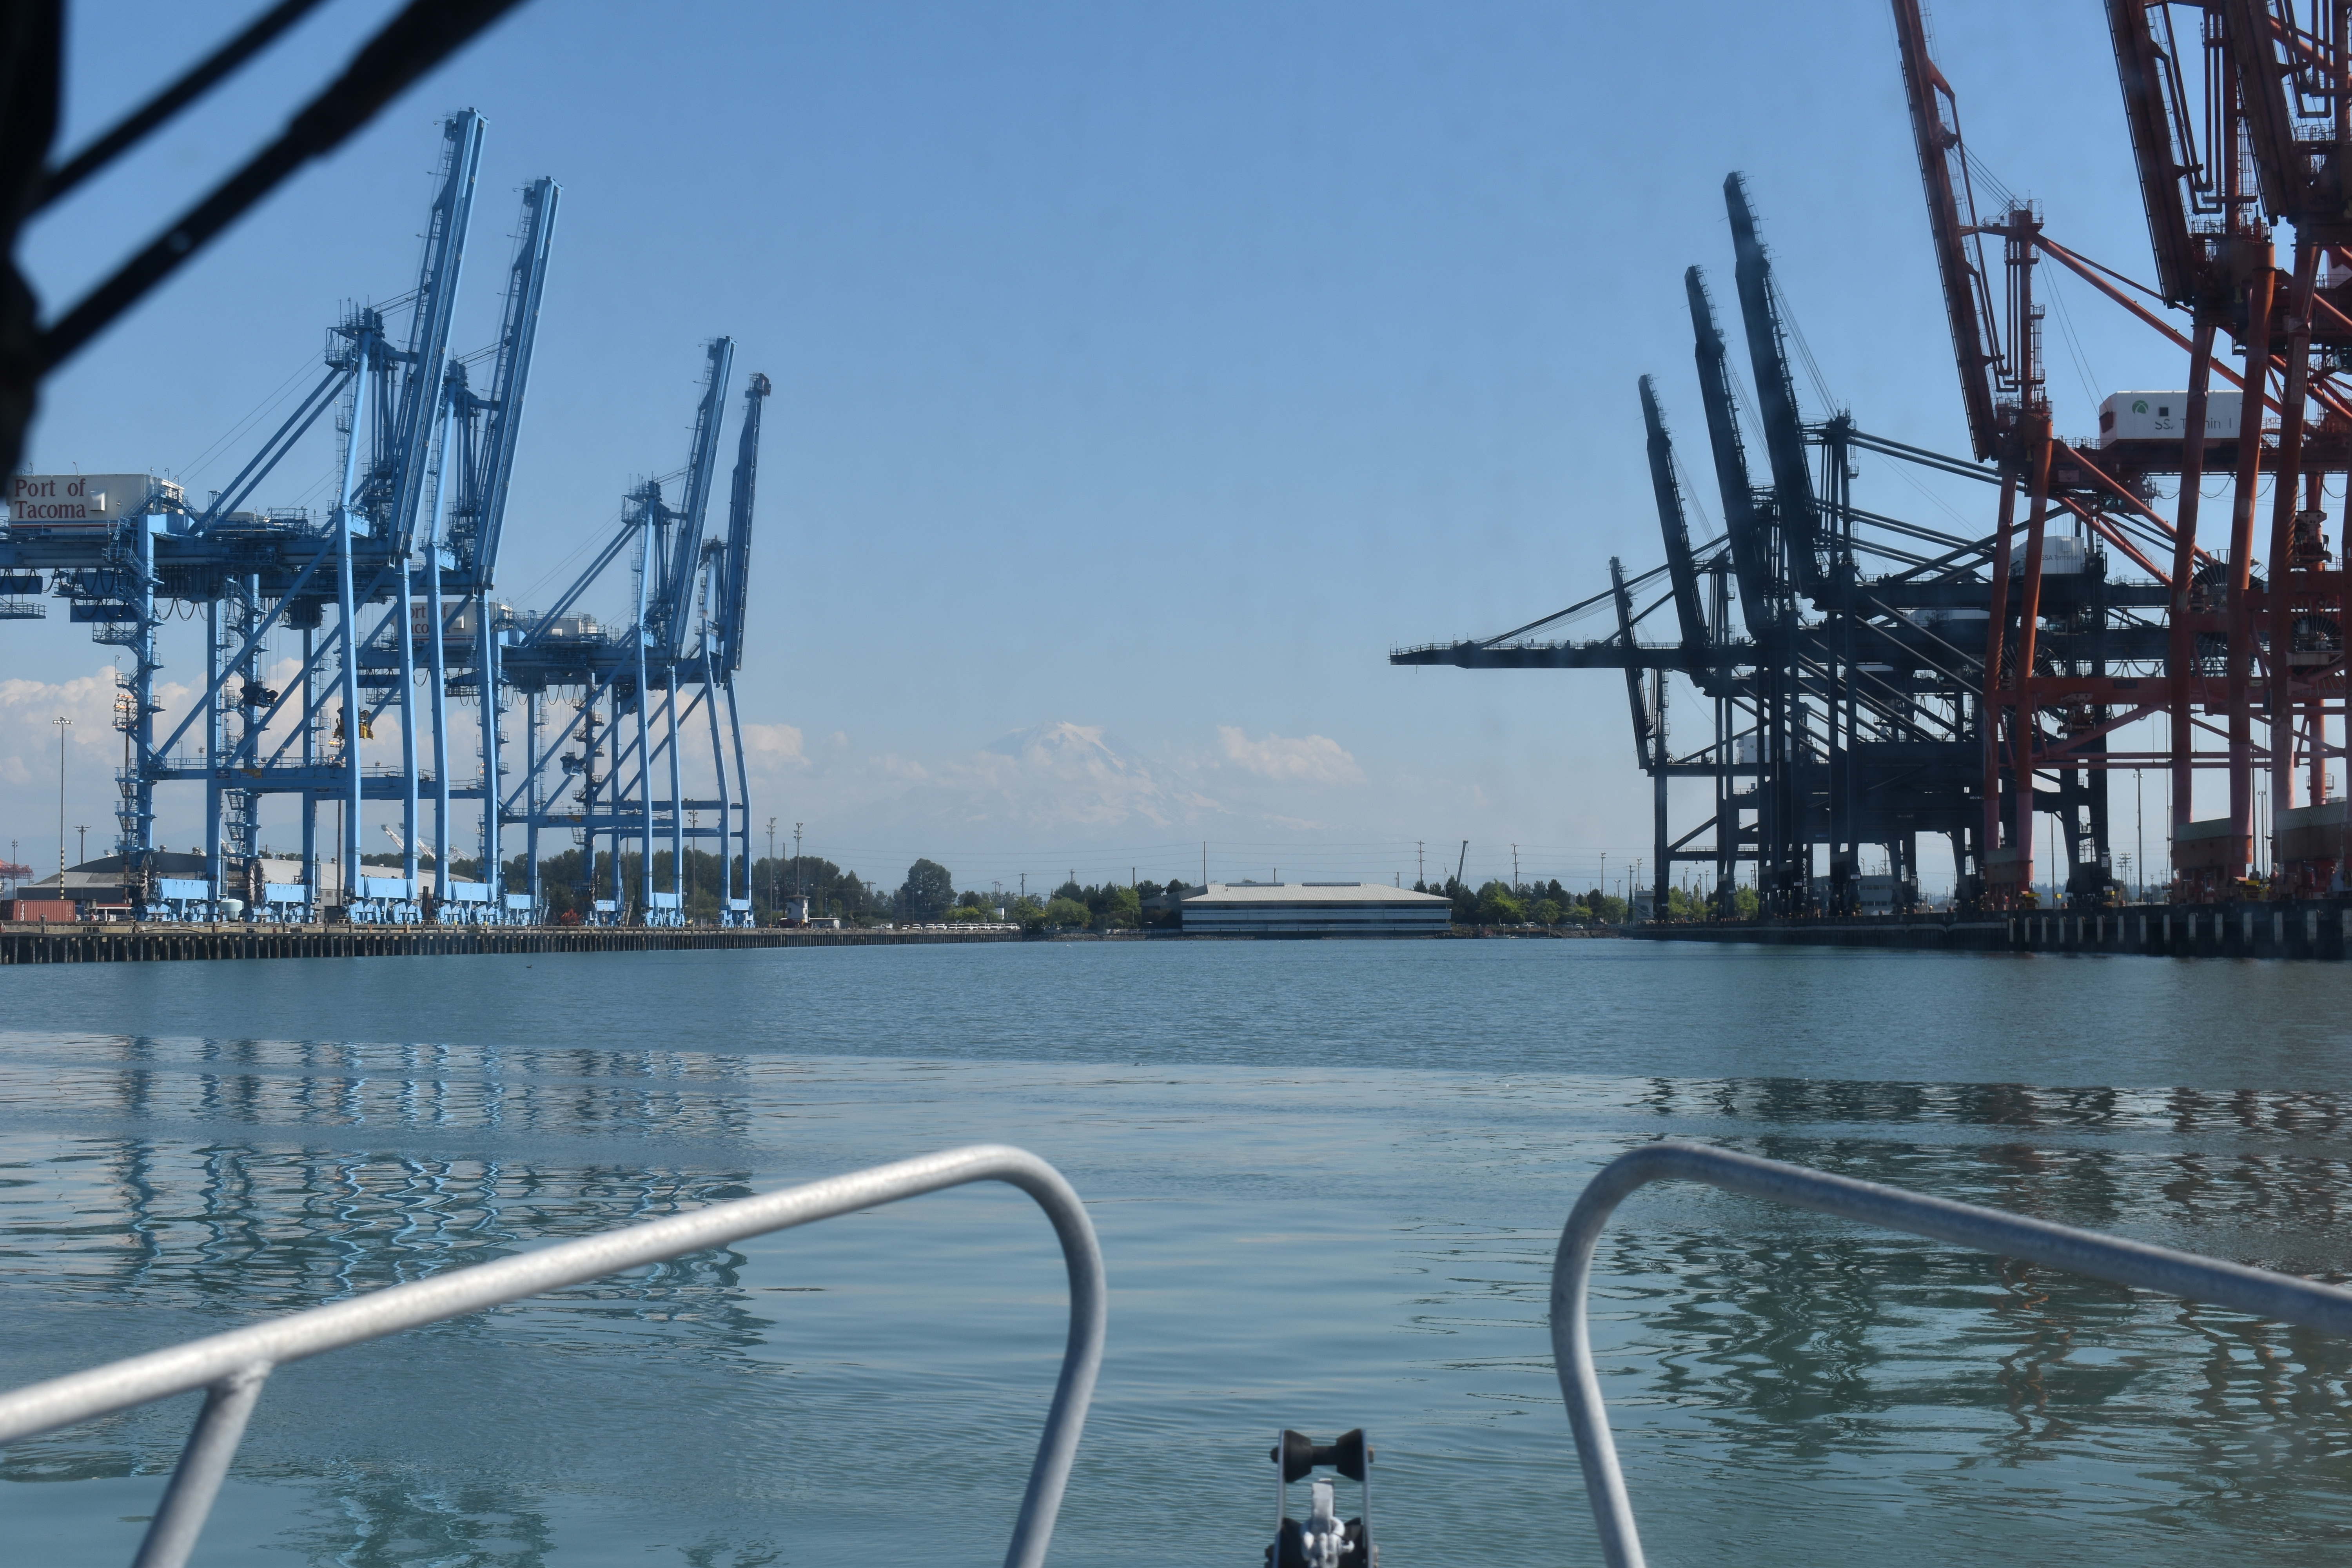 Part of the Port of Tacoma, which sits on Commencement Bay, on August 25, 2022. Photo by Lauren Gallup.